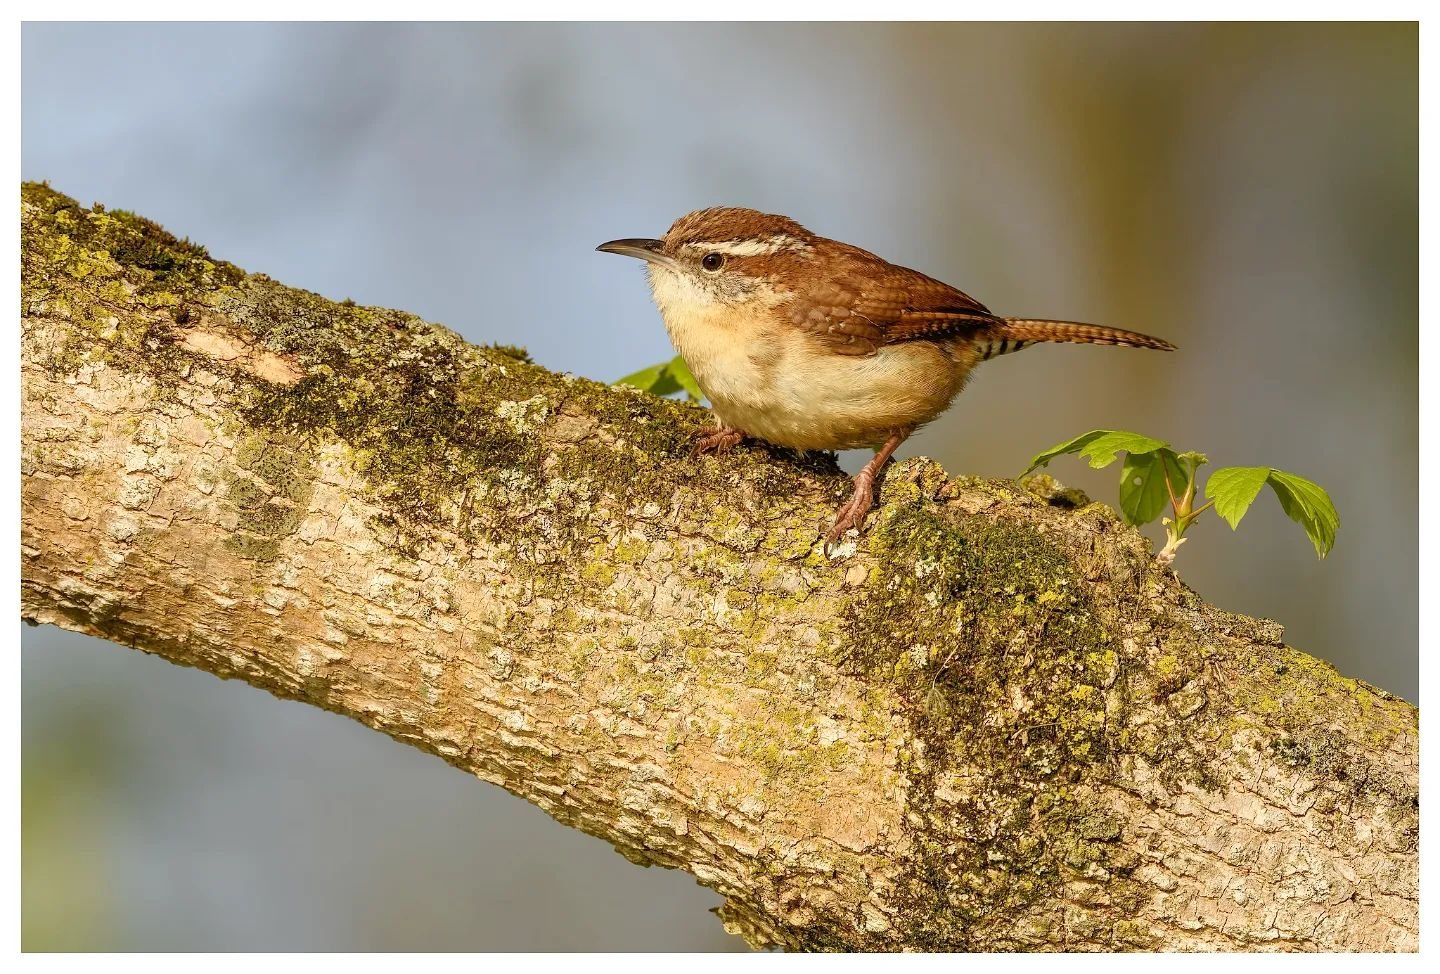 20lbs of Attitude in a 0.71 Ounce Sack
.
.
.
.
One of my favorite birds, the Carolina Wren packs a lot of attitude in a small package.As the name suggests, they aren't really native to Ohio, and can act as a barometer for weather. Not being as resili